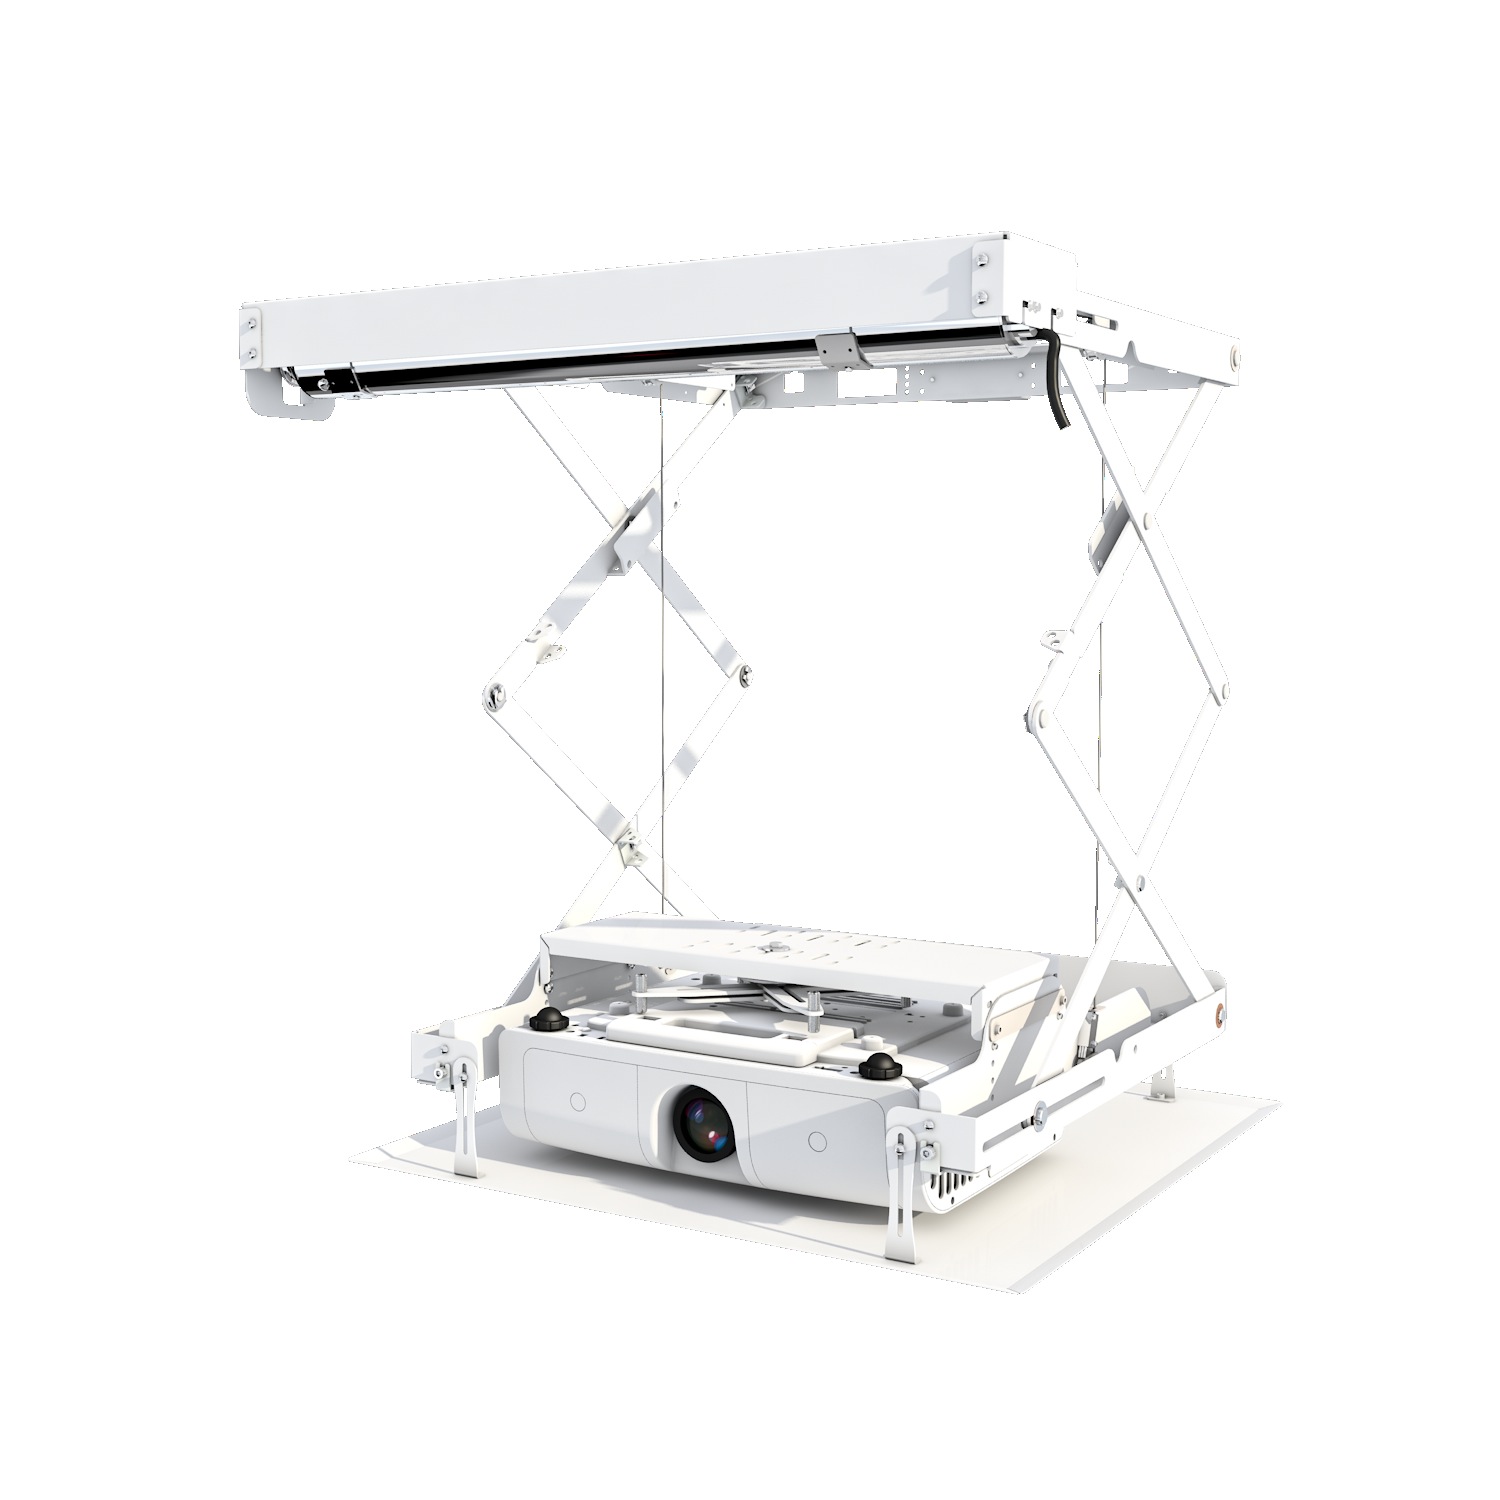 Compact² 80 ceiling lift